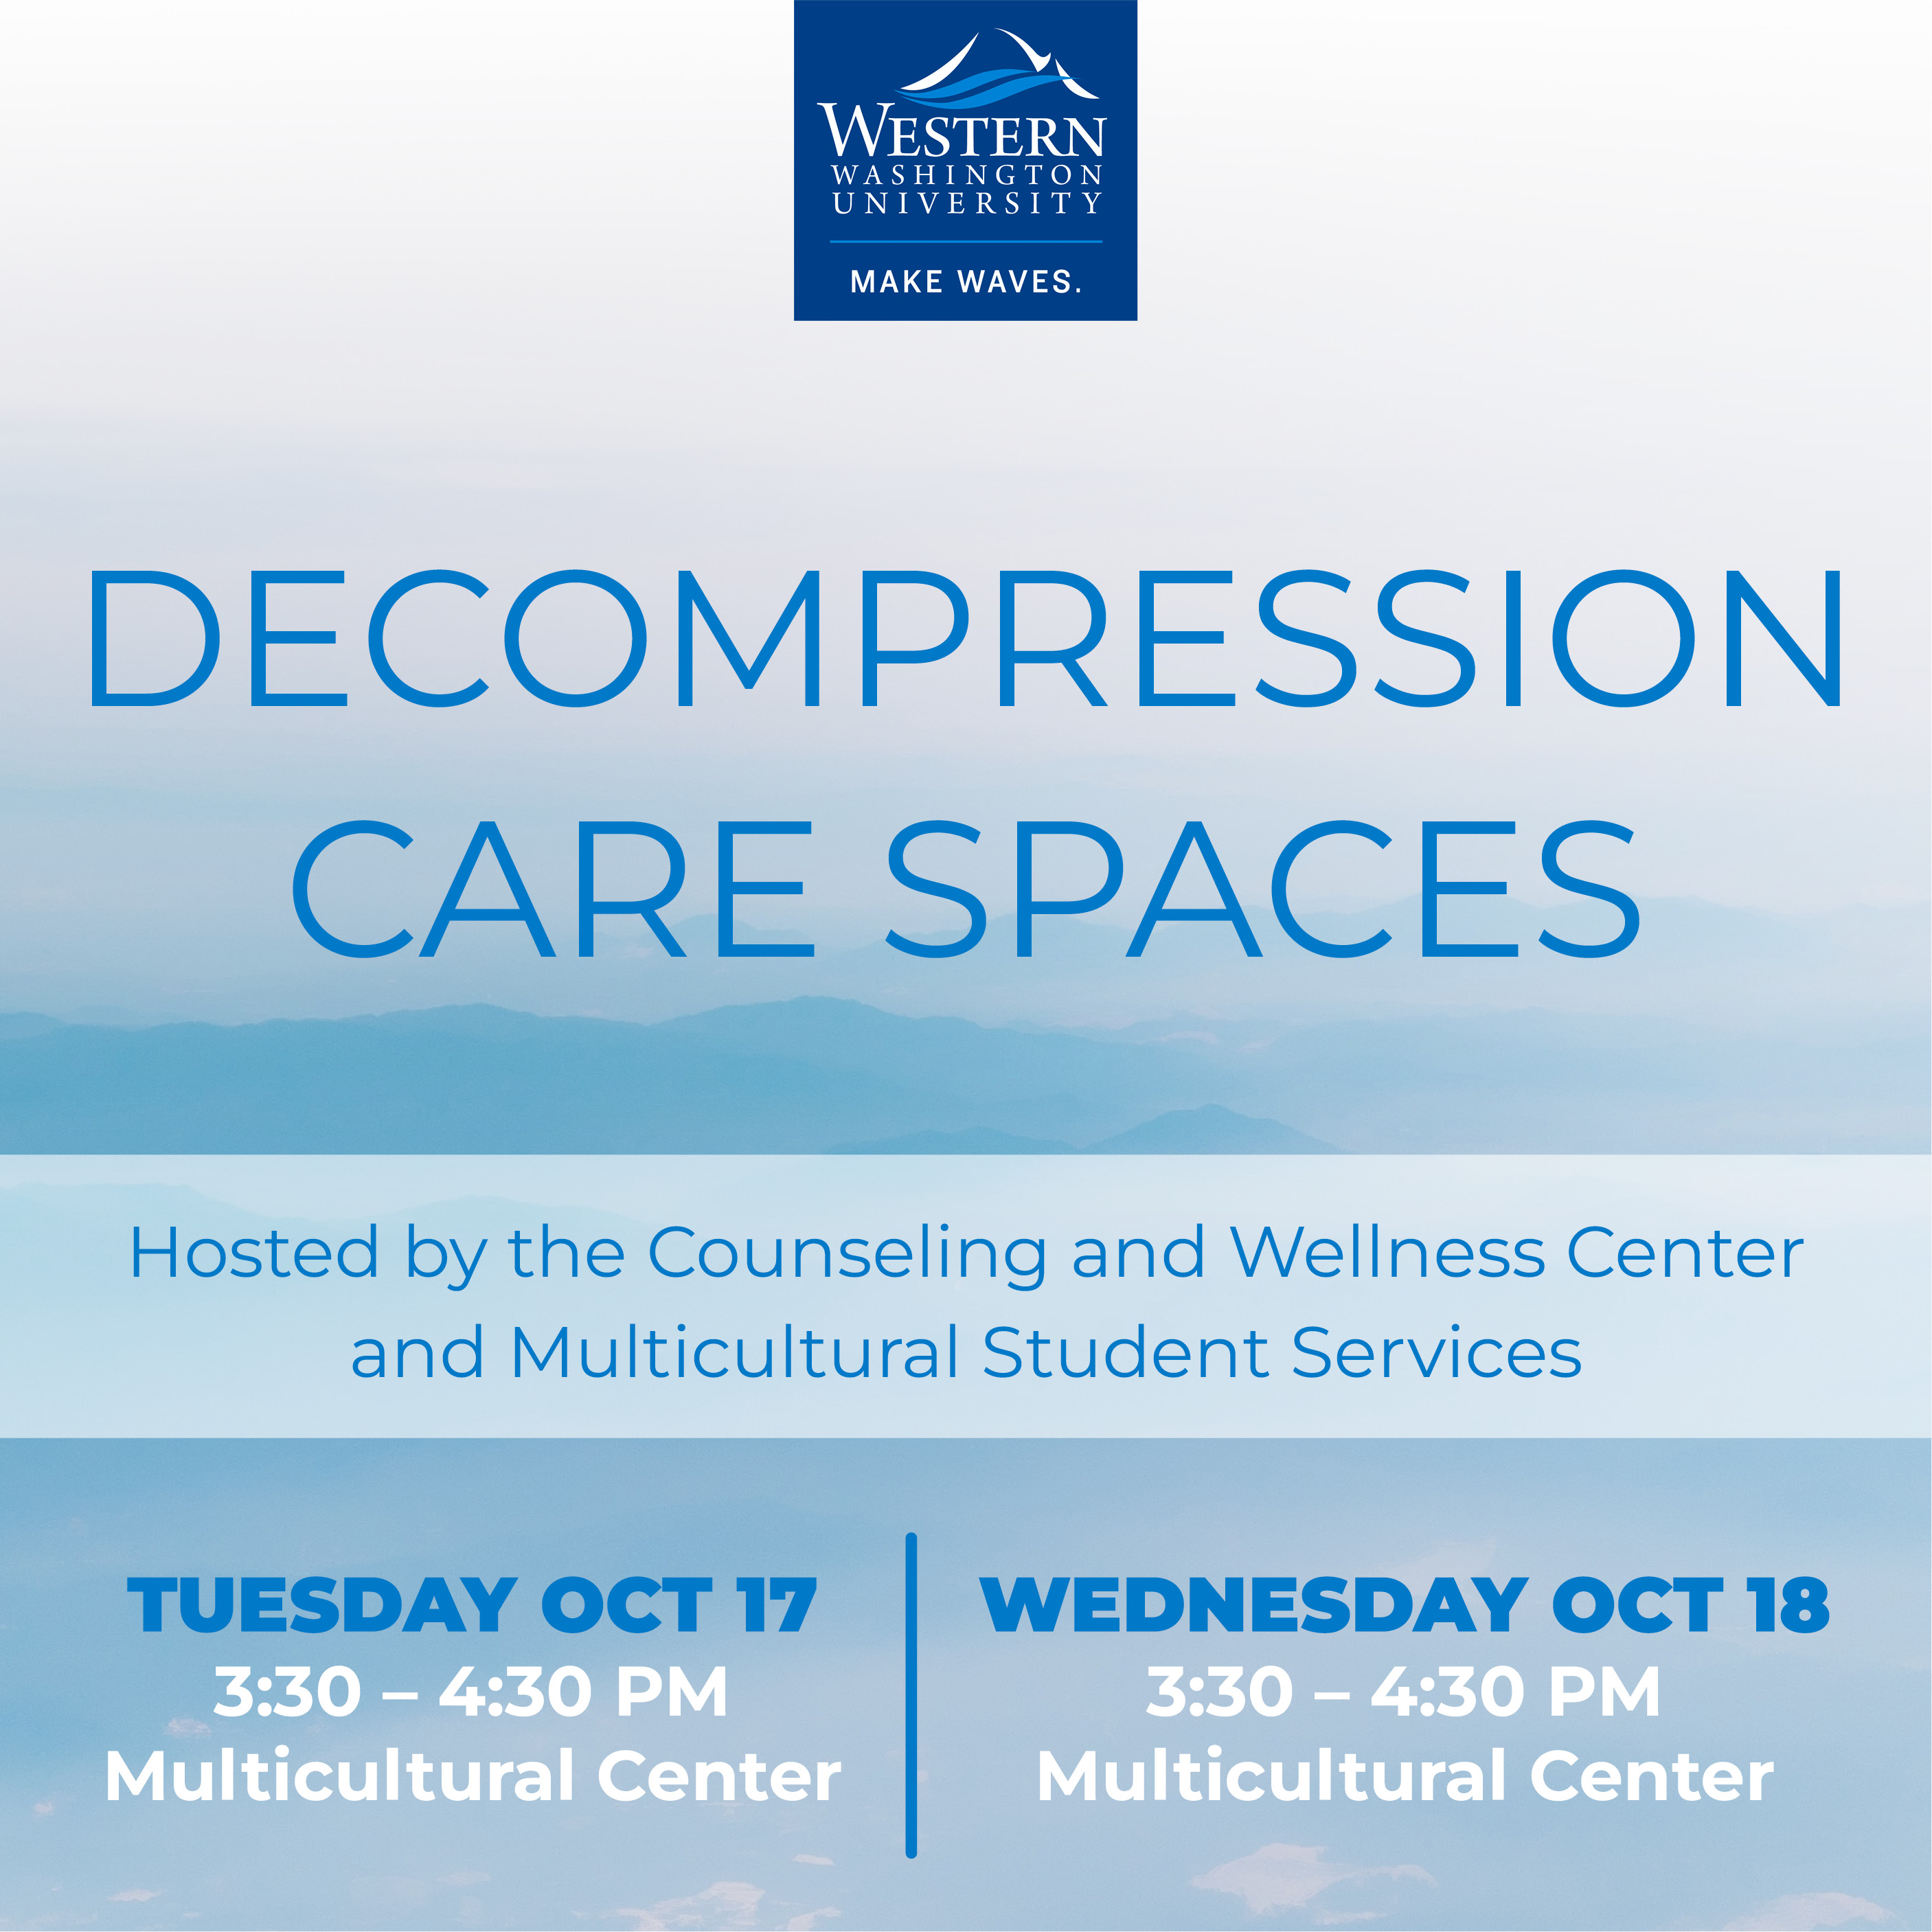 On a light-blue background depicting gentle, rolling hills, the title "Decompression Care Spaces" in blue lettering appears above event information for the Oct. 17 and Oct. 18 spaces hosted by the Counseling and Wellness Center and Multicultural Student Services.